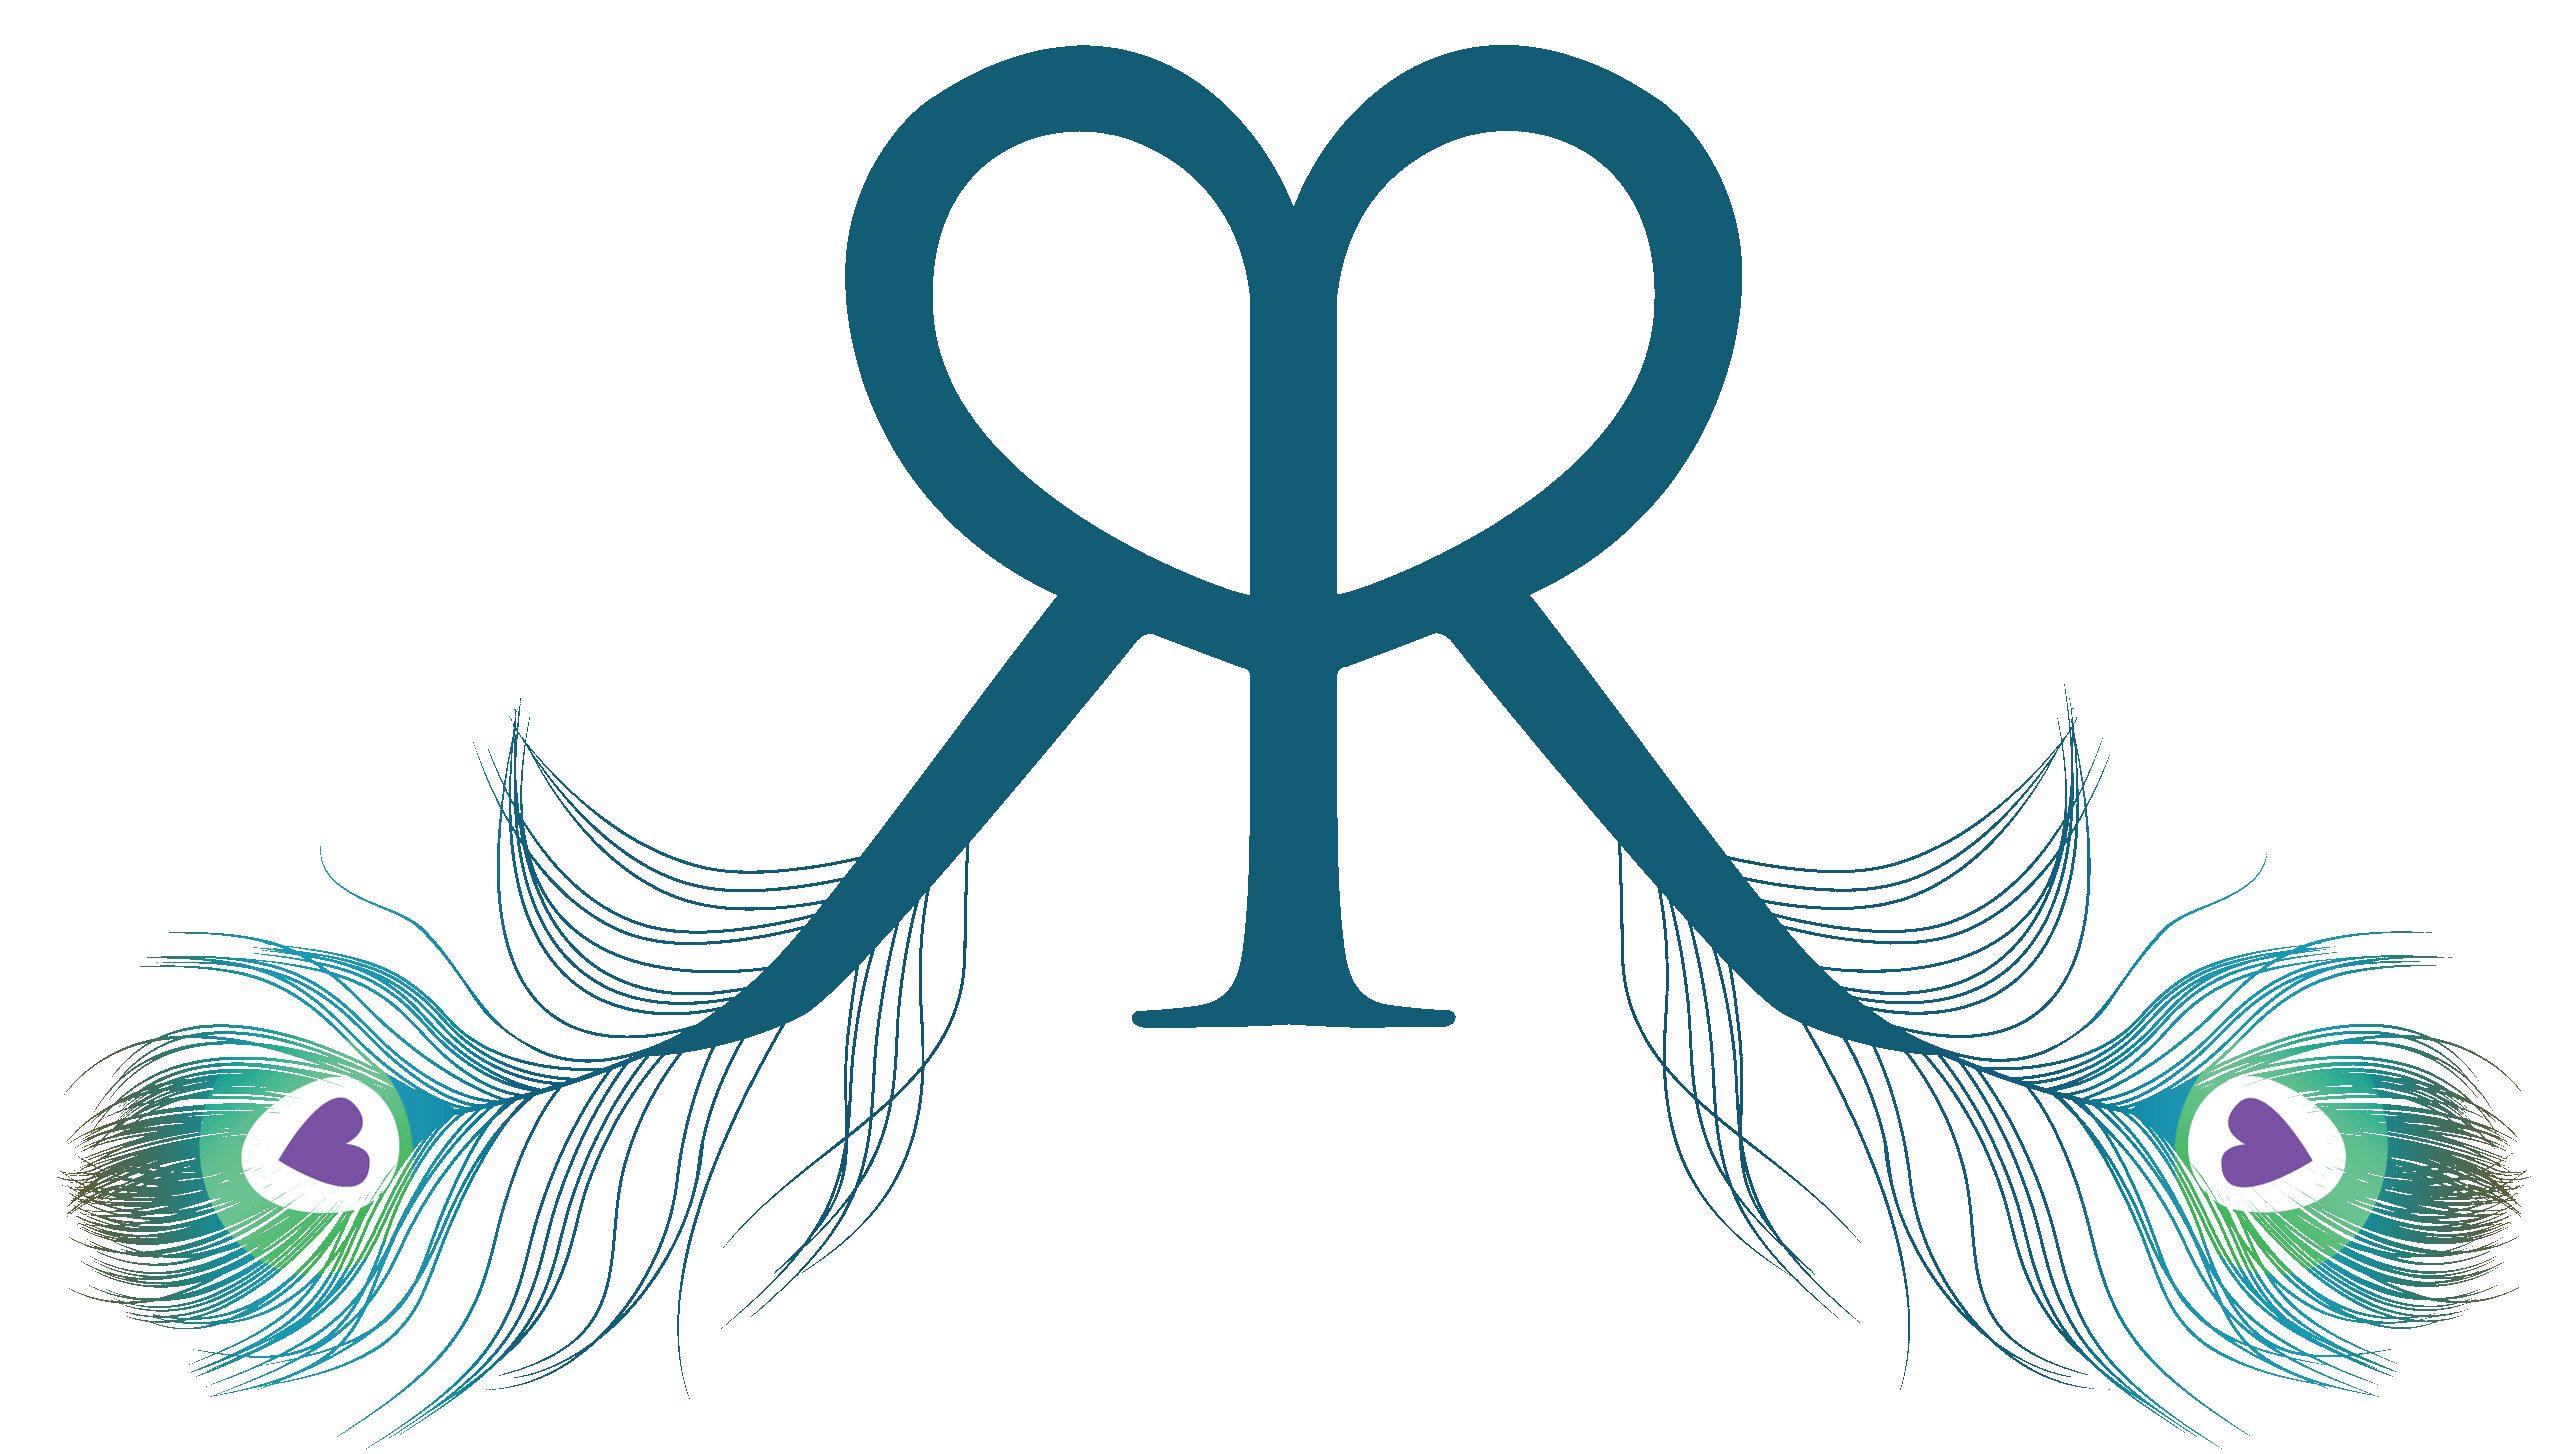 Download Customized monogram double R and peacock feathers ...